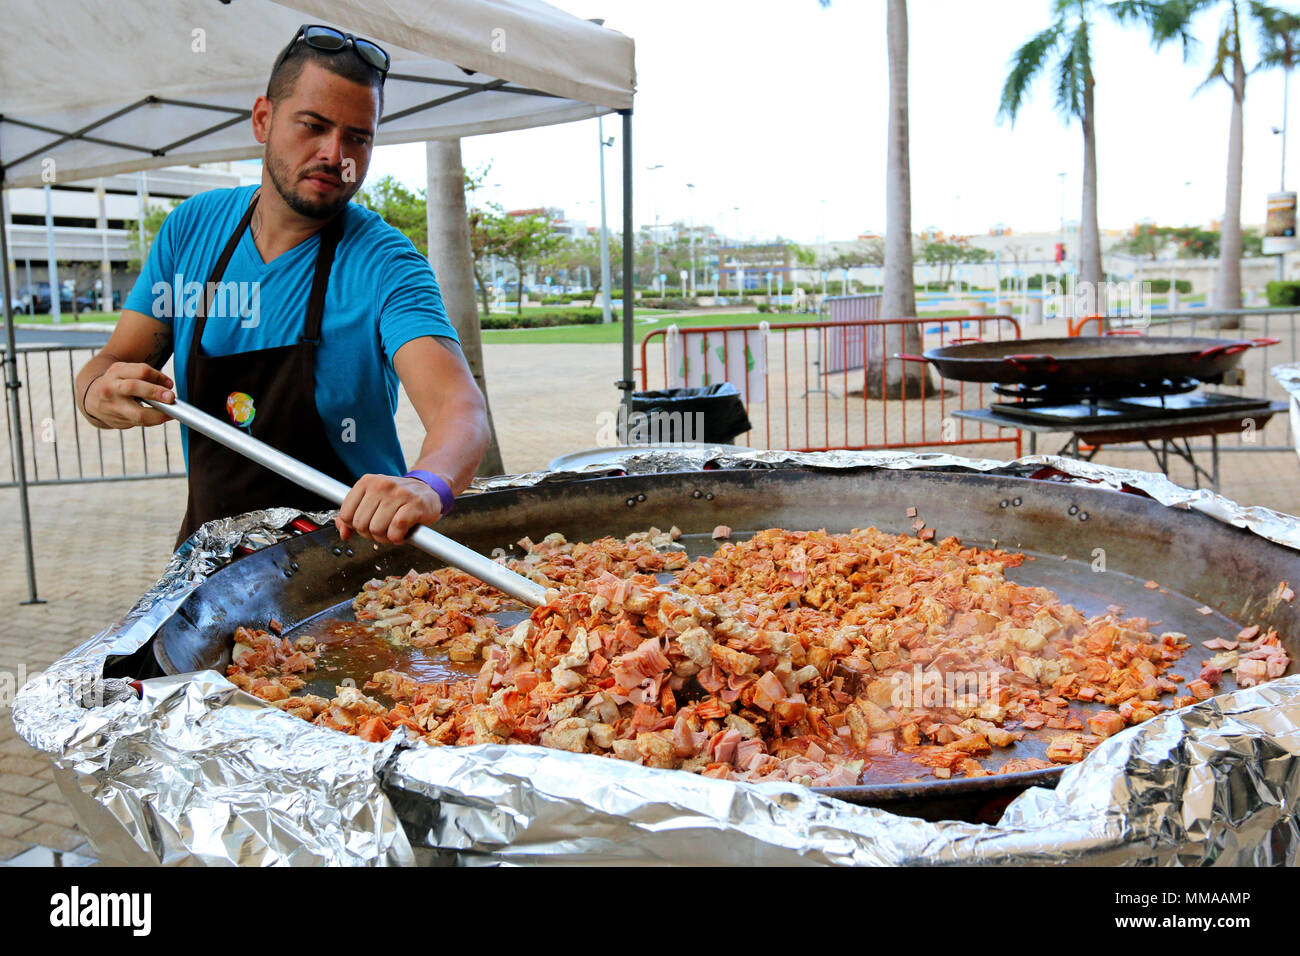 Alejandro Torres, a native of San Juan, Puerto Rico and chef volunteering with the non-profit organization, World Central Kitchen, prepares food for residents of Puerto Rico at the José Miguel Agrelot Coliseum of Puerto Rico in San Juan, Puerto Rico, Oct. 3, 2017. WCK prepared to feed approximately 46,000 residents of Puerto Rico. Chef Jose Andres, the founder of WCK, is supporting the Federal Emergency Management Agency in helping those affected by Hurricane Maria to minimize suffering as part of the overall whole-of-government response efforts. (U.S. Army photo by Pvt. Alleea Oliver) Stock Photo